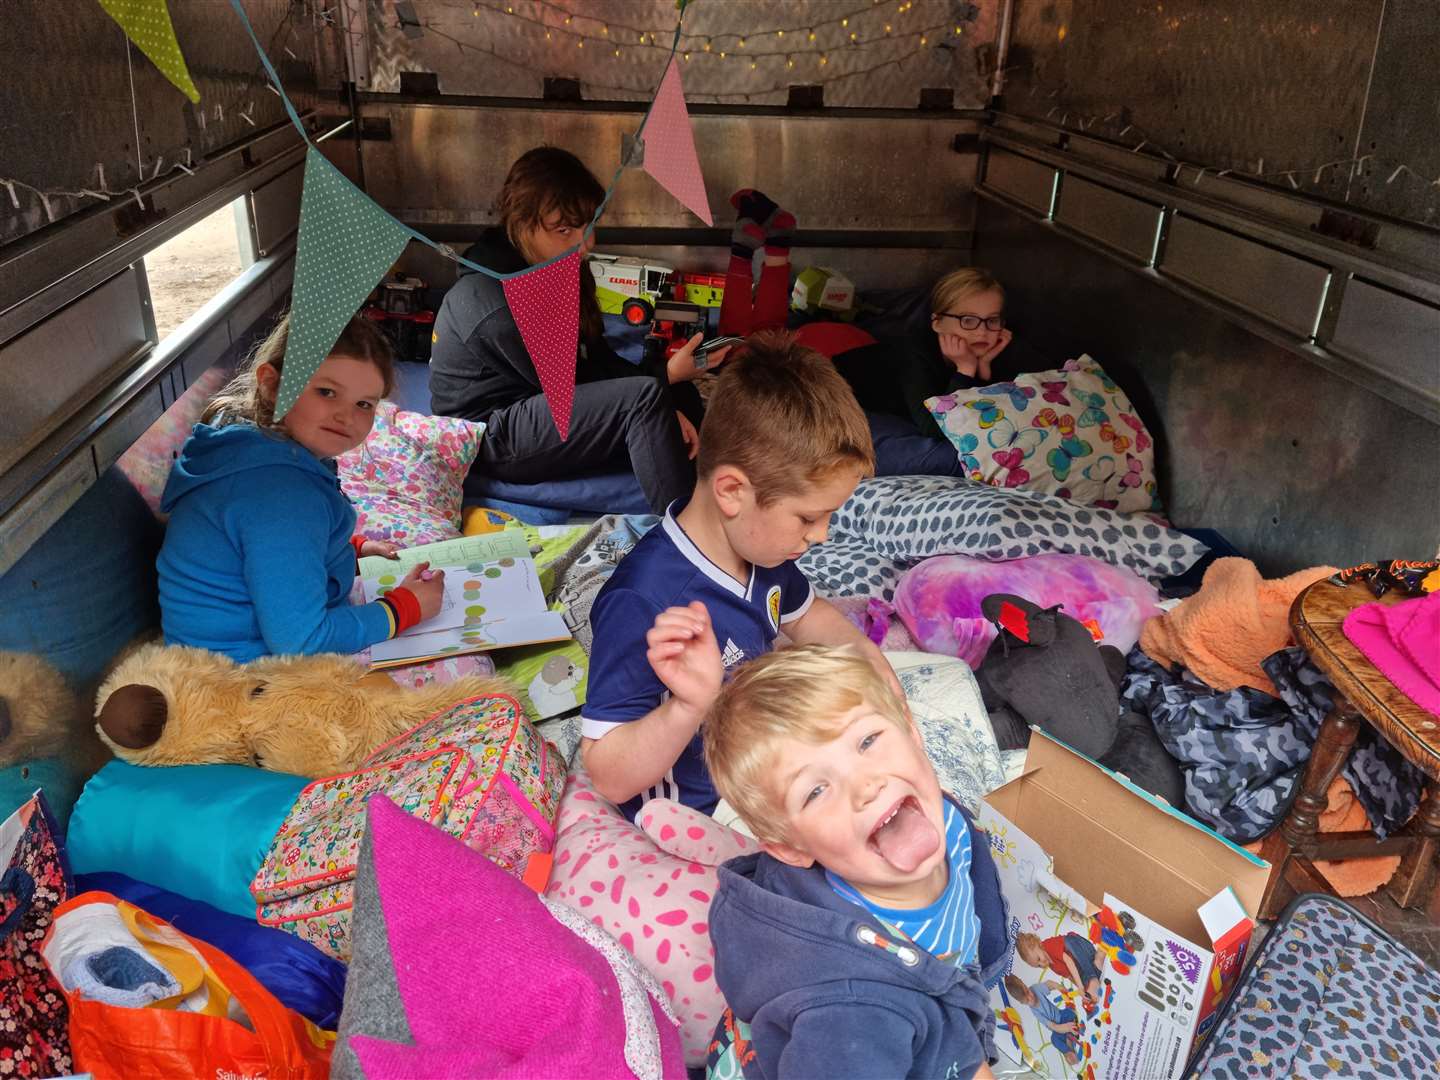 The children had blankets, pillows and games in the trailer.